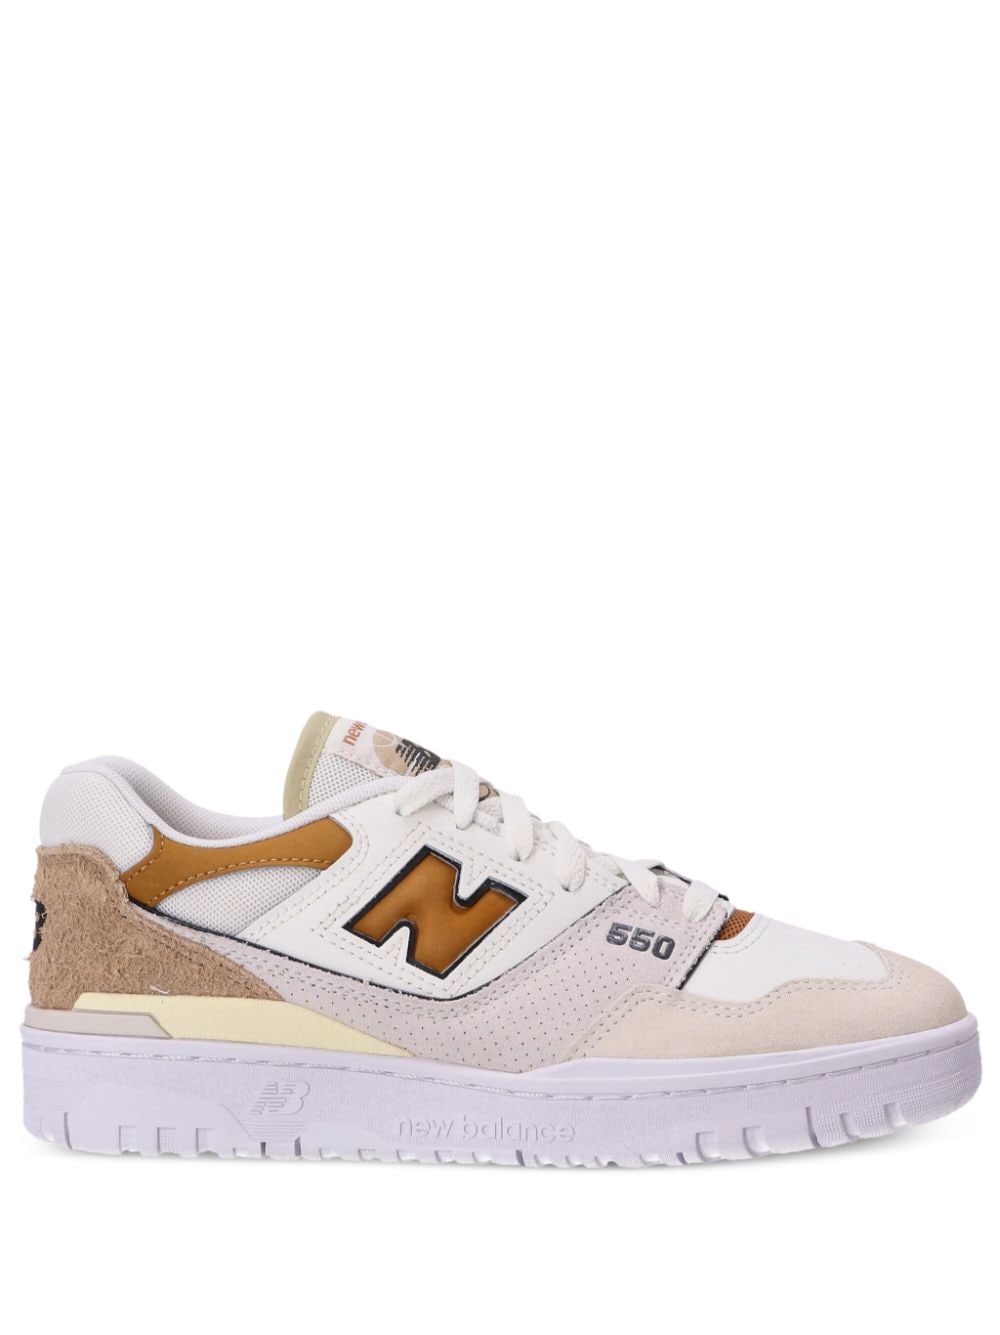 New Balance 550 leather sneakers - Neutrals